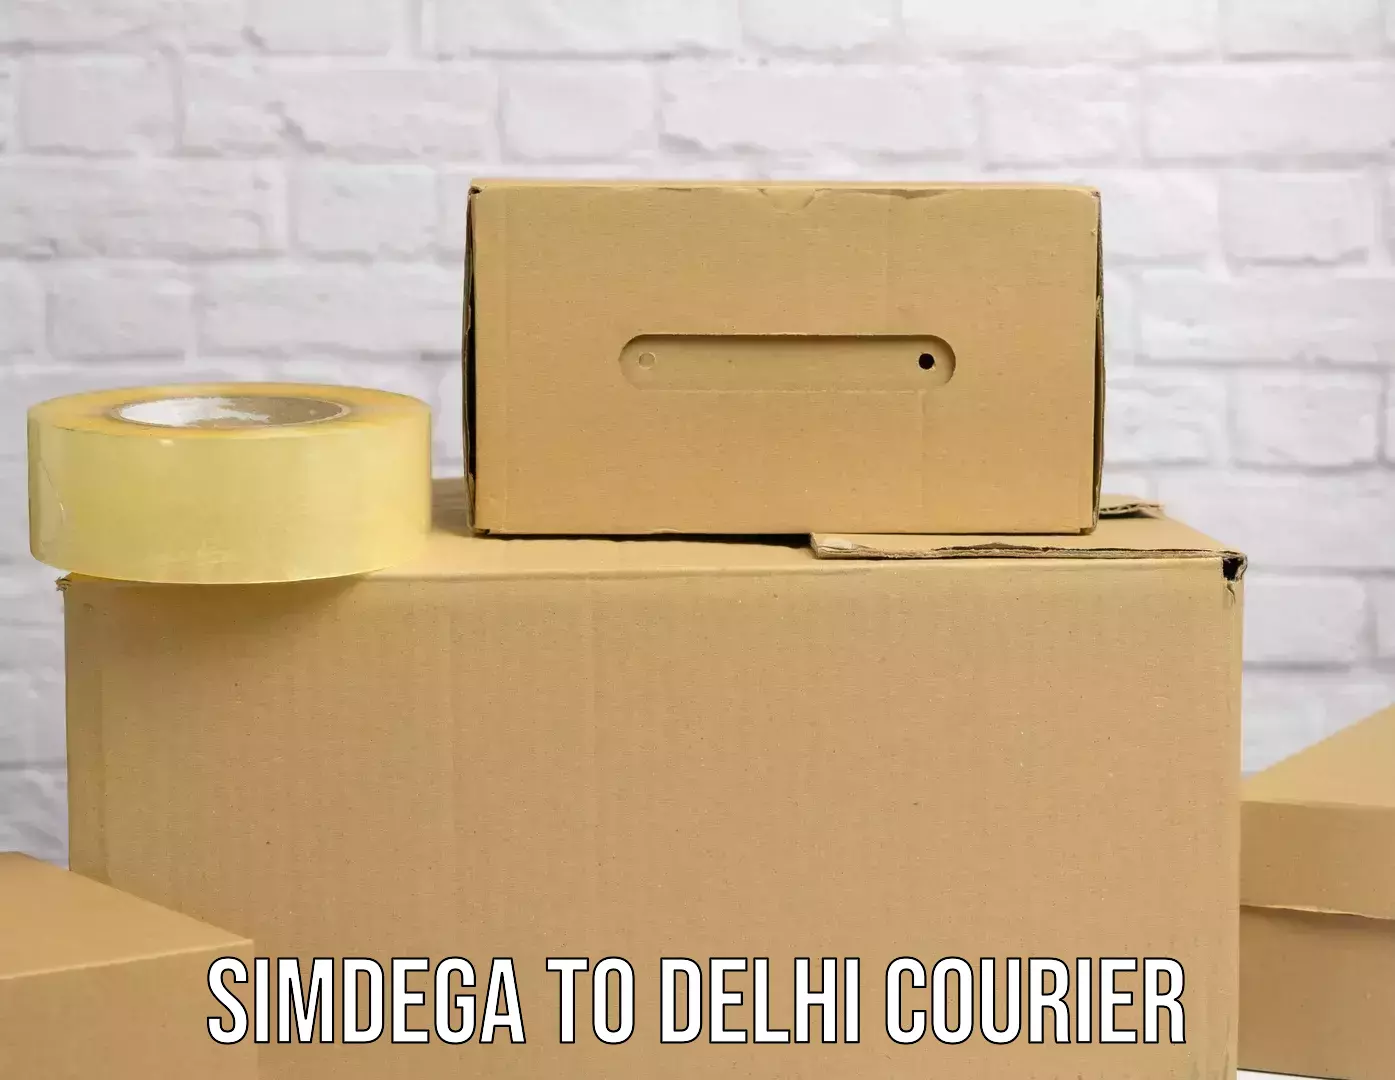 Express package services Simdega to East Delhi